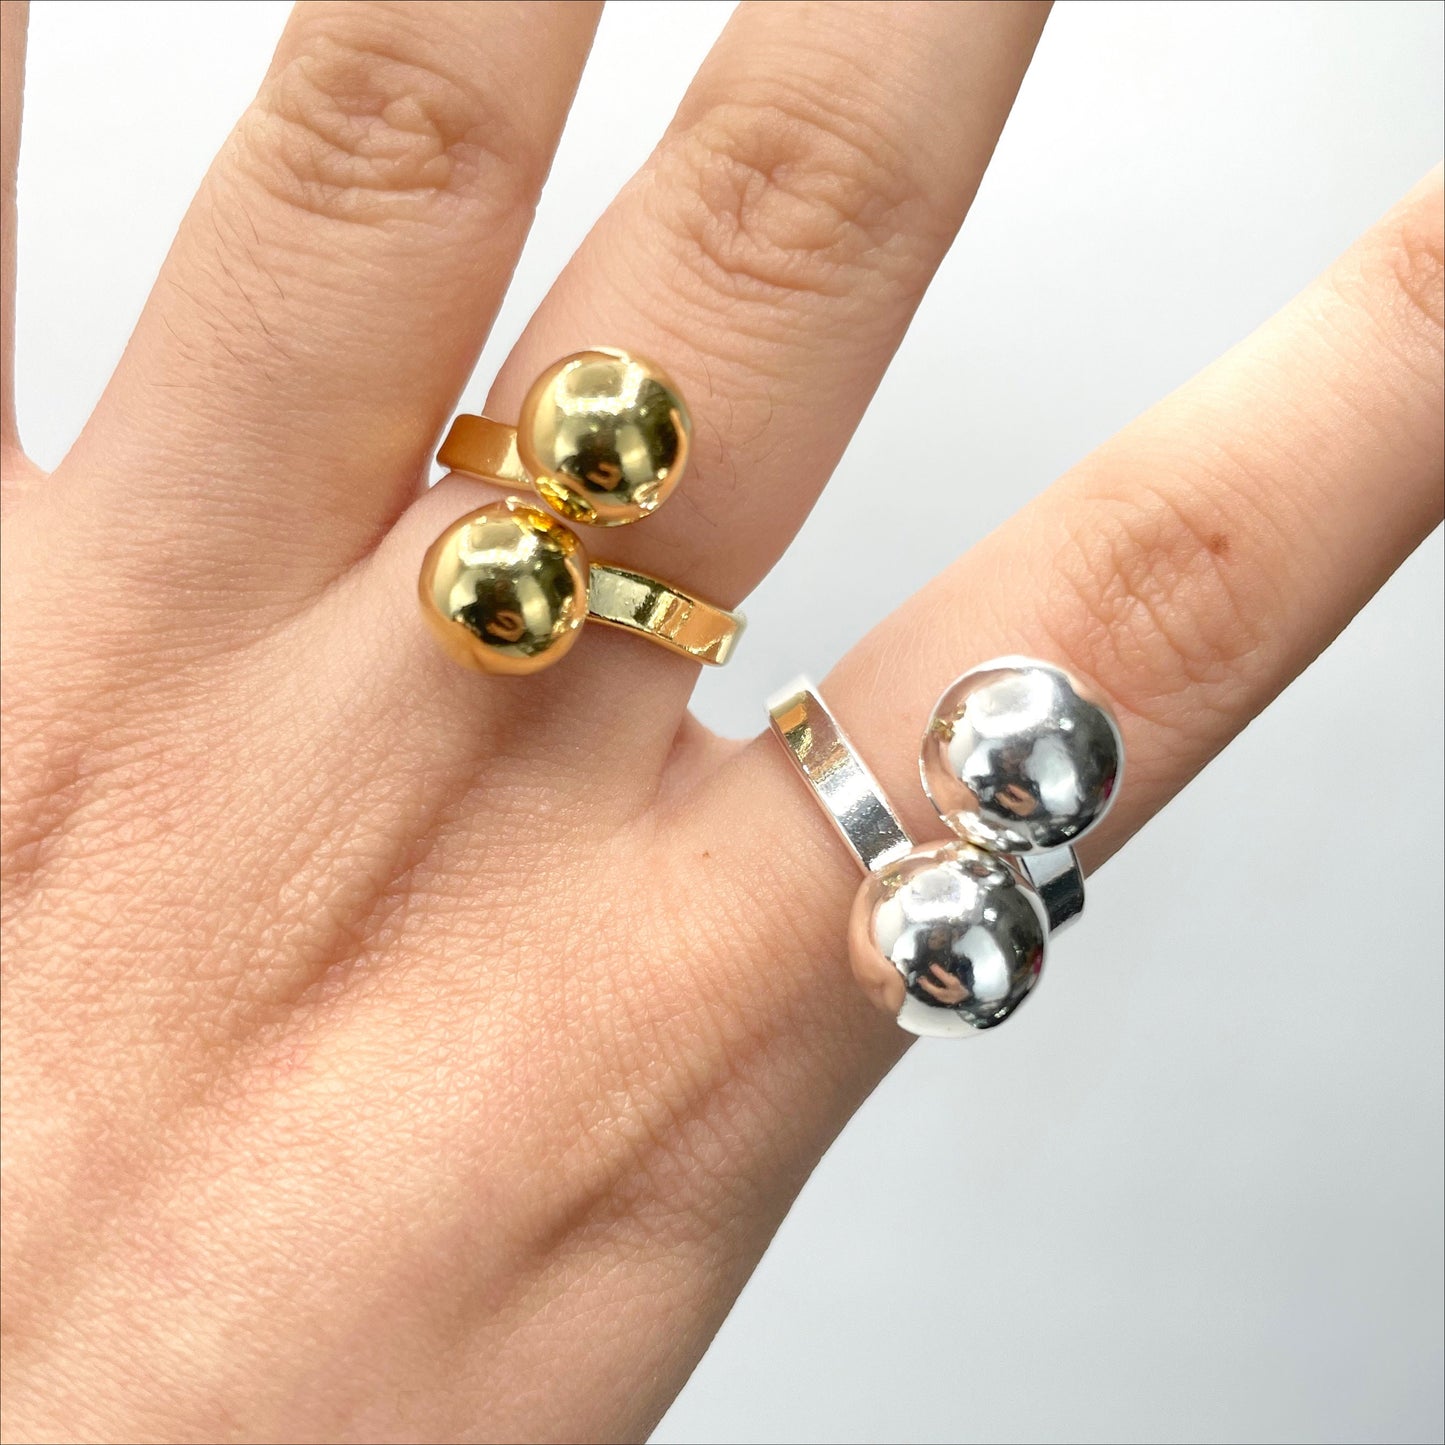 18k Gold Filled or Silver Filled, or Three Tones Adjustable Double Ball Ring Wholesale Jewelry Making Supplies